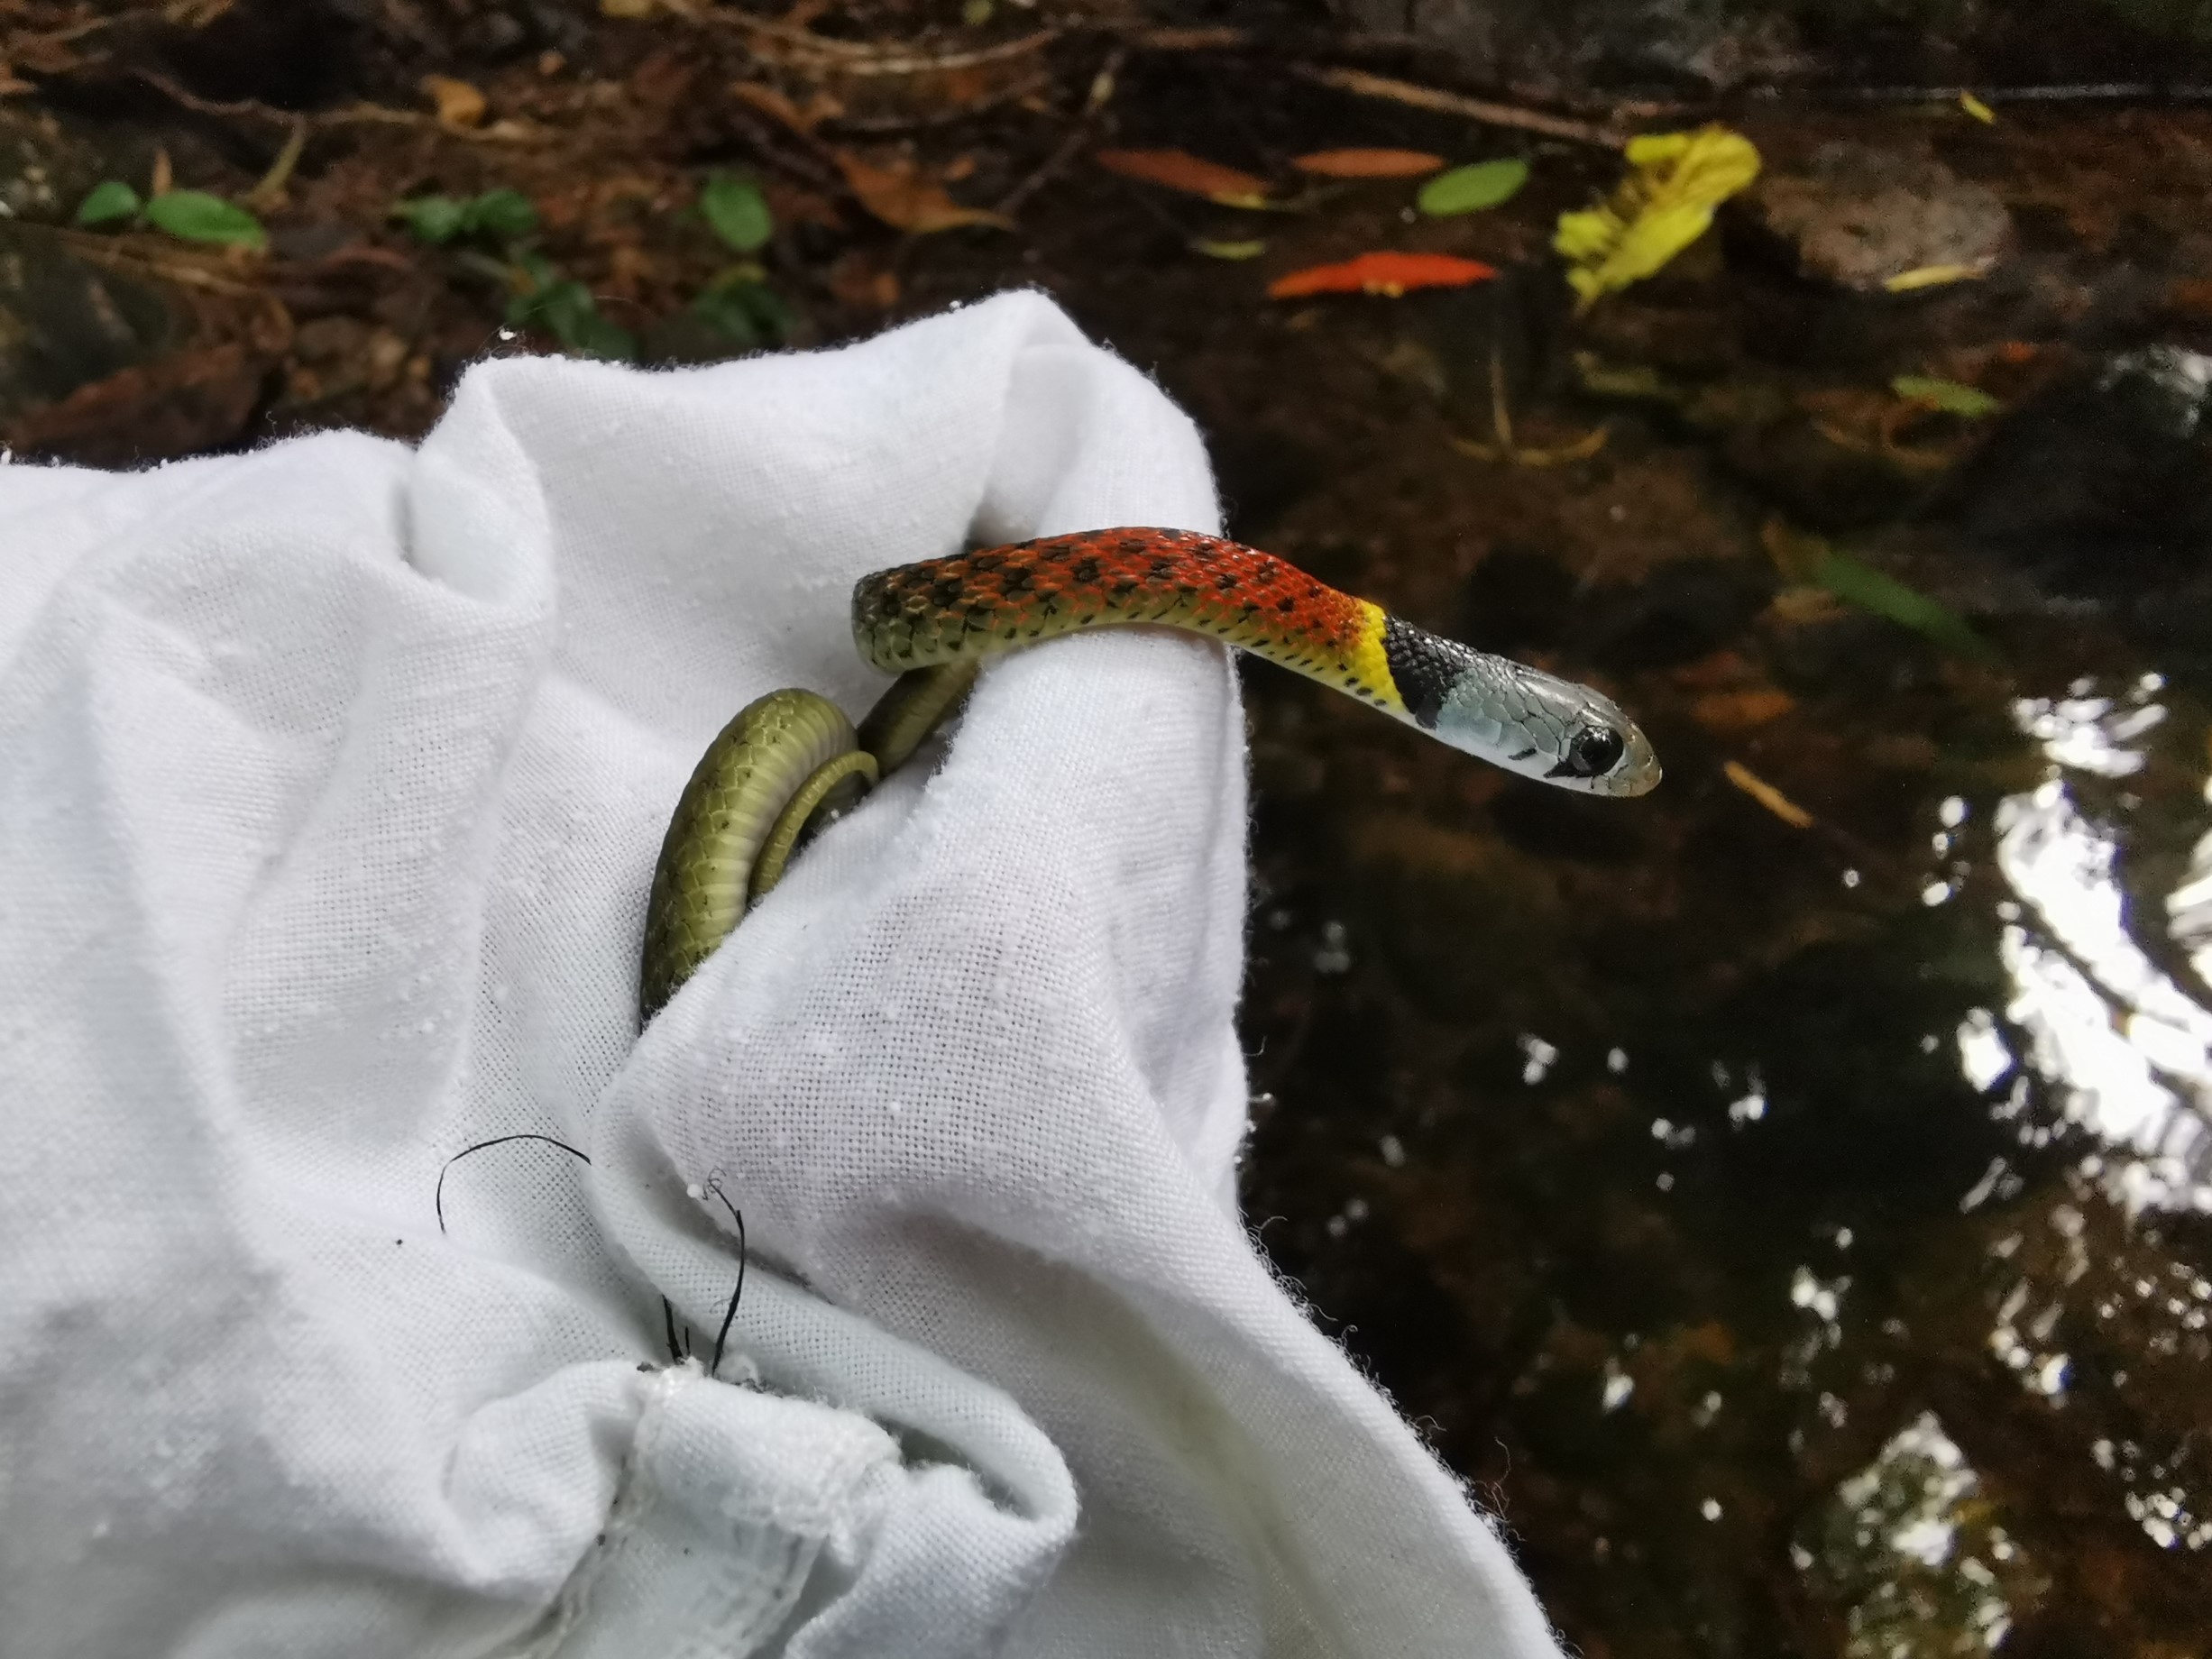 A juvenile red-necked keelback (Rhabdophis subminiatus helleri) (venomous), a commonly encountered snake, was released back to nature after processing on 7 July 2021.